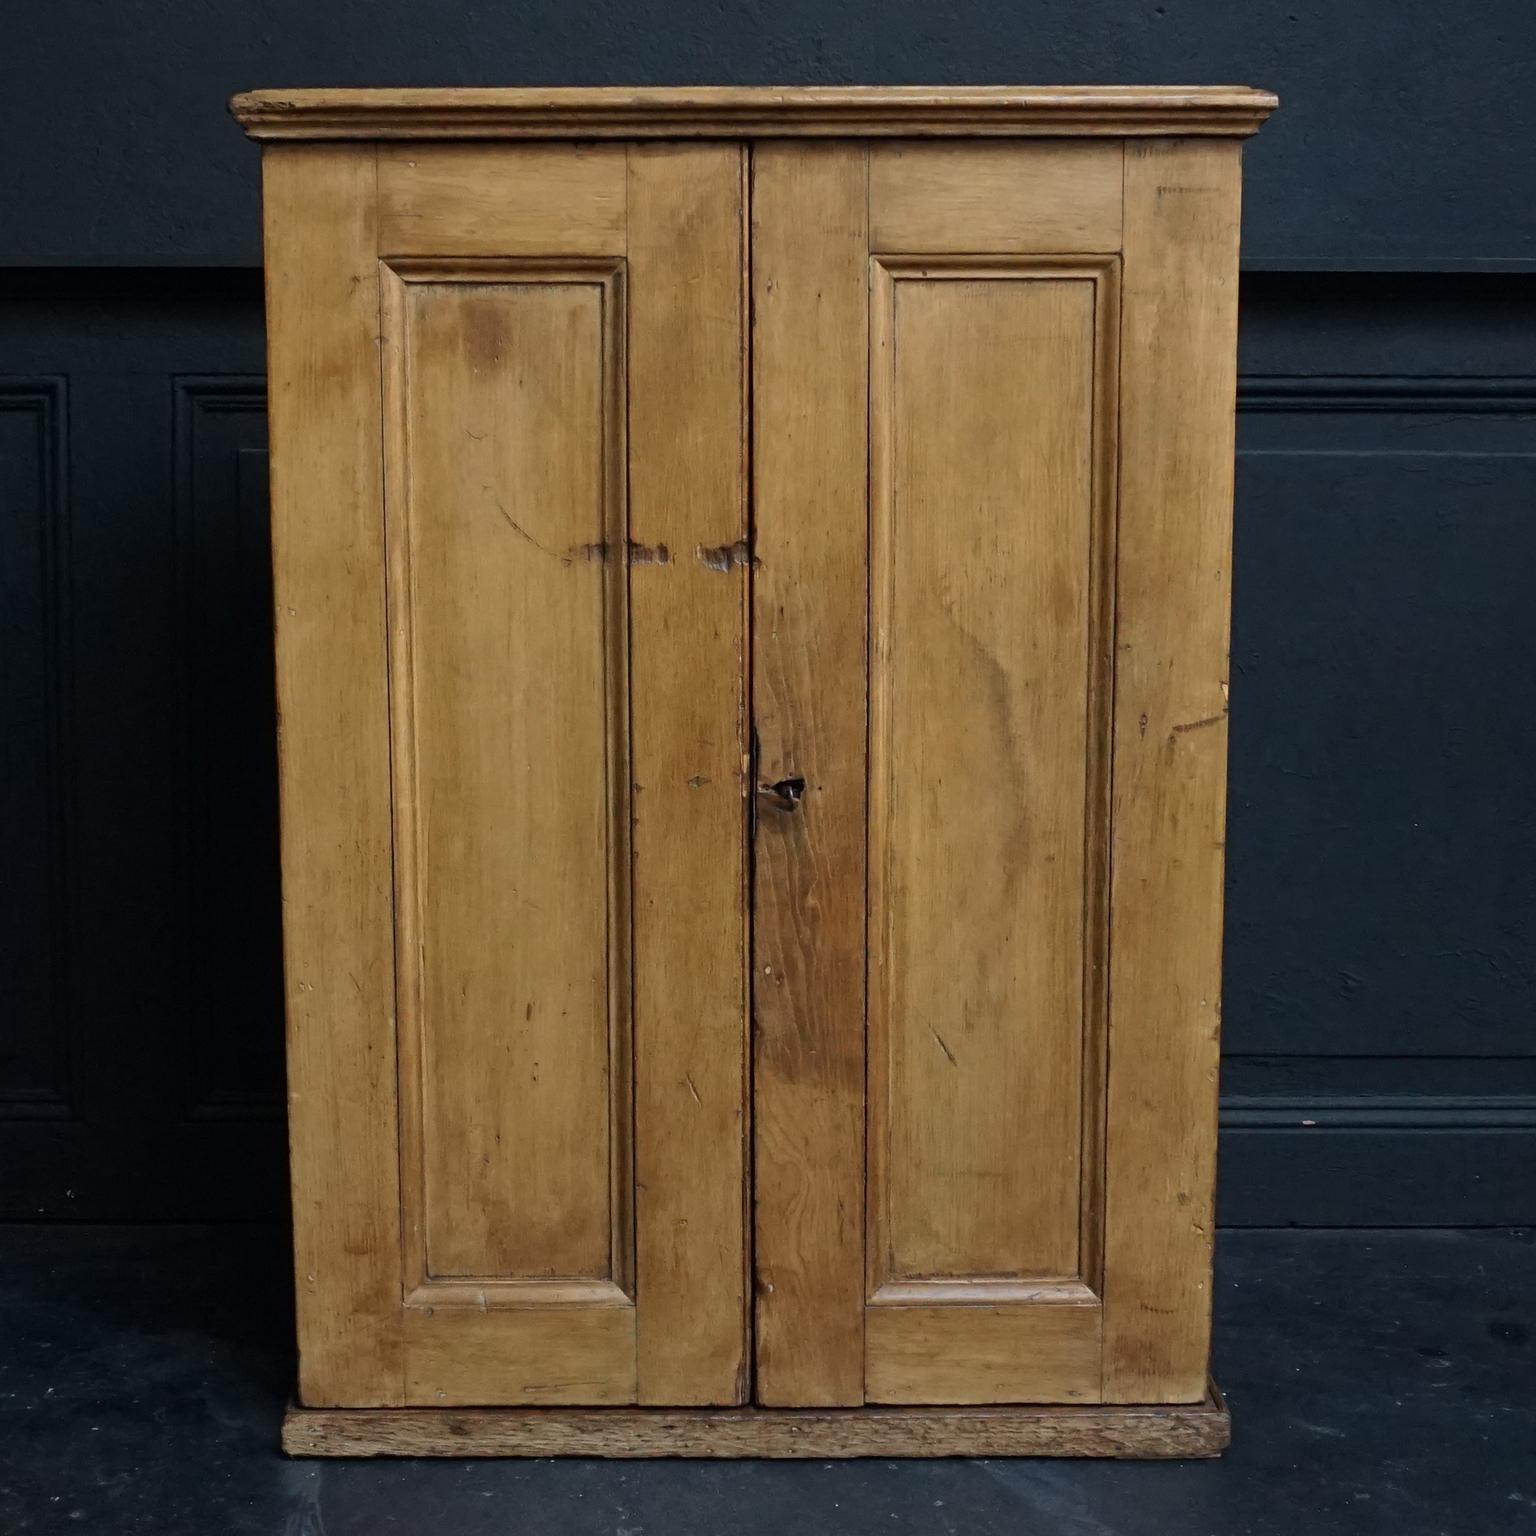 Unusual antique pretty little antique pinewood cupboard for on top of a counter or table, with two double deep smoothly swinging opening doors and double lock mechanism.

Shelves both in the interior of the cabinet and in the door, which is pretty